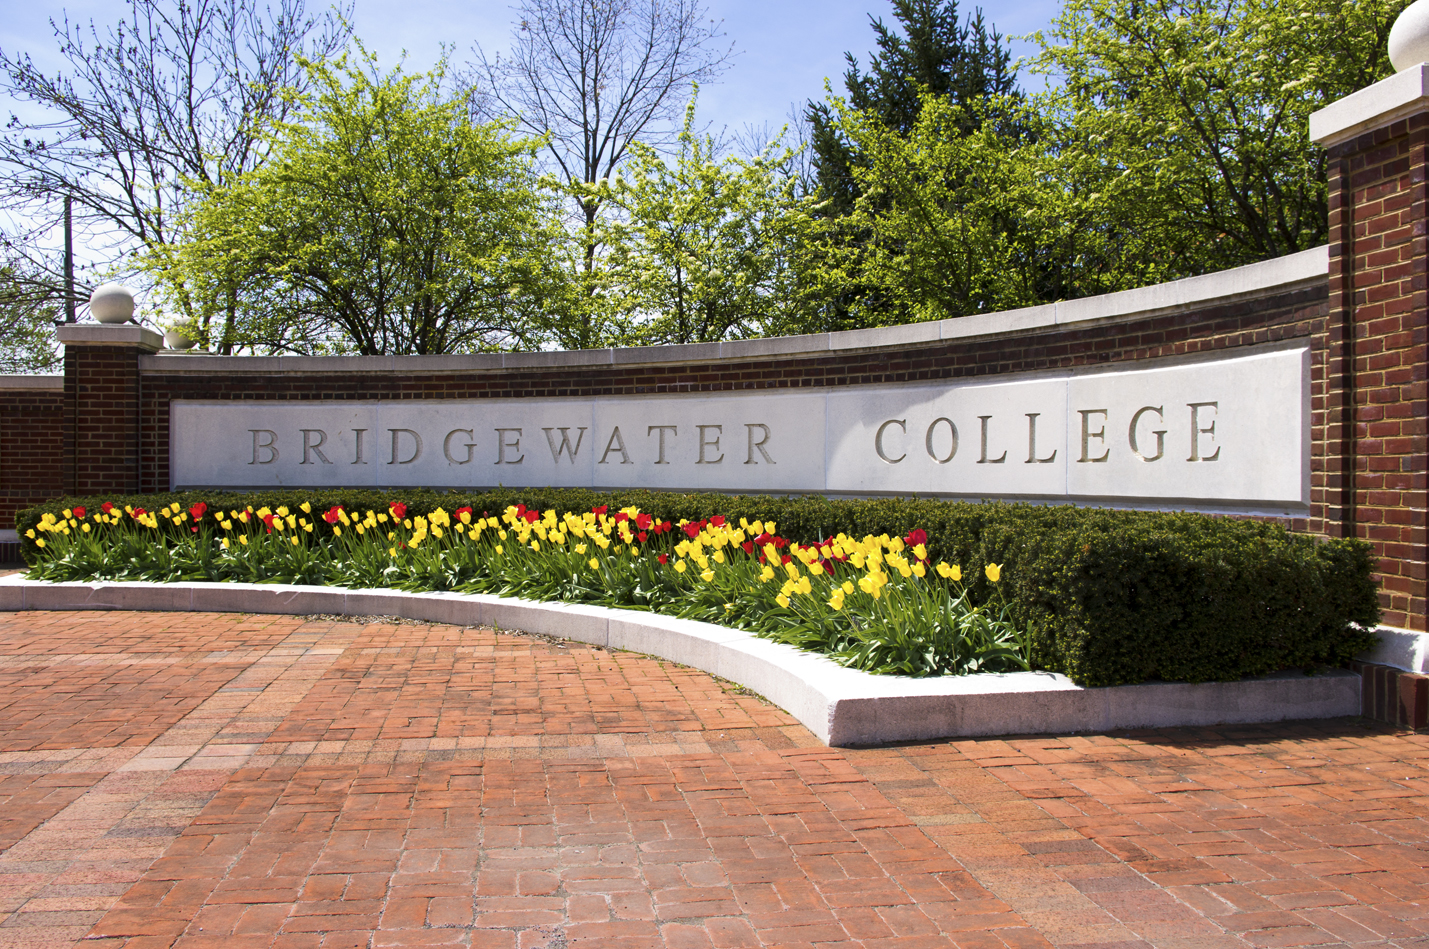 The Bridgewater College cornerstone with red and yellow flowers blooming in front of it